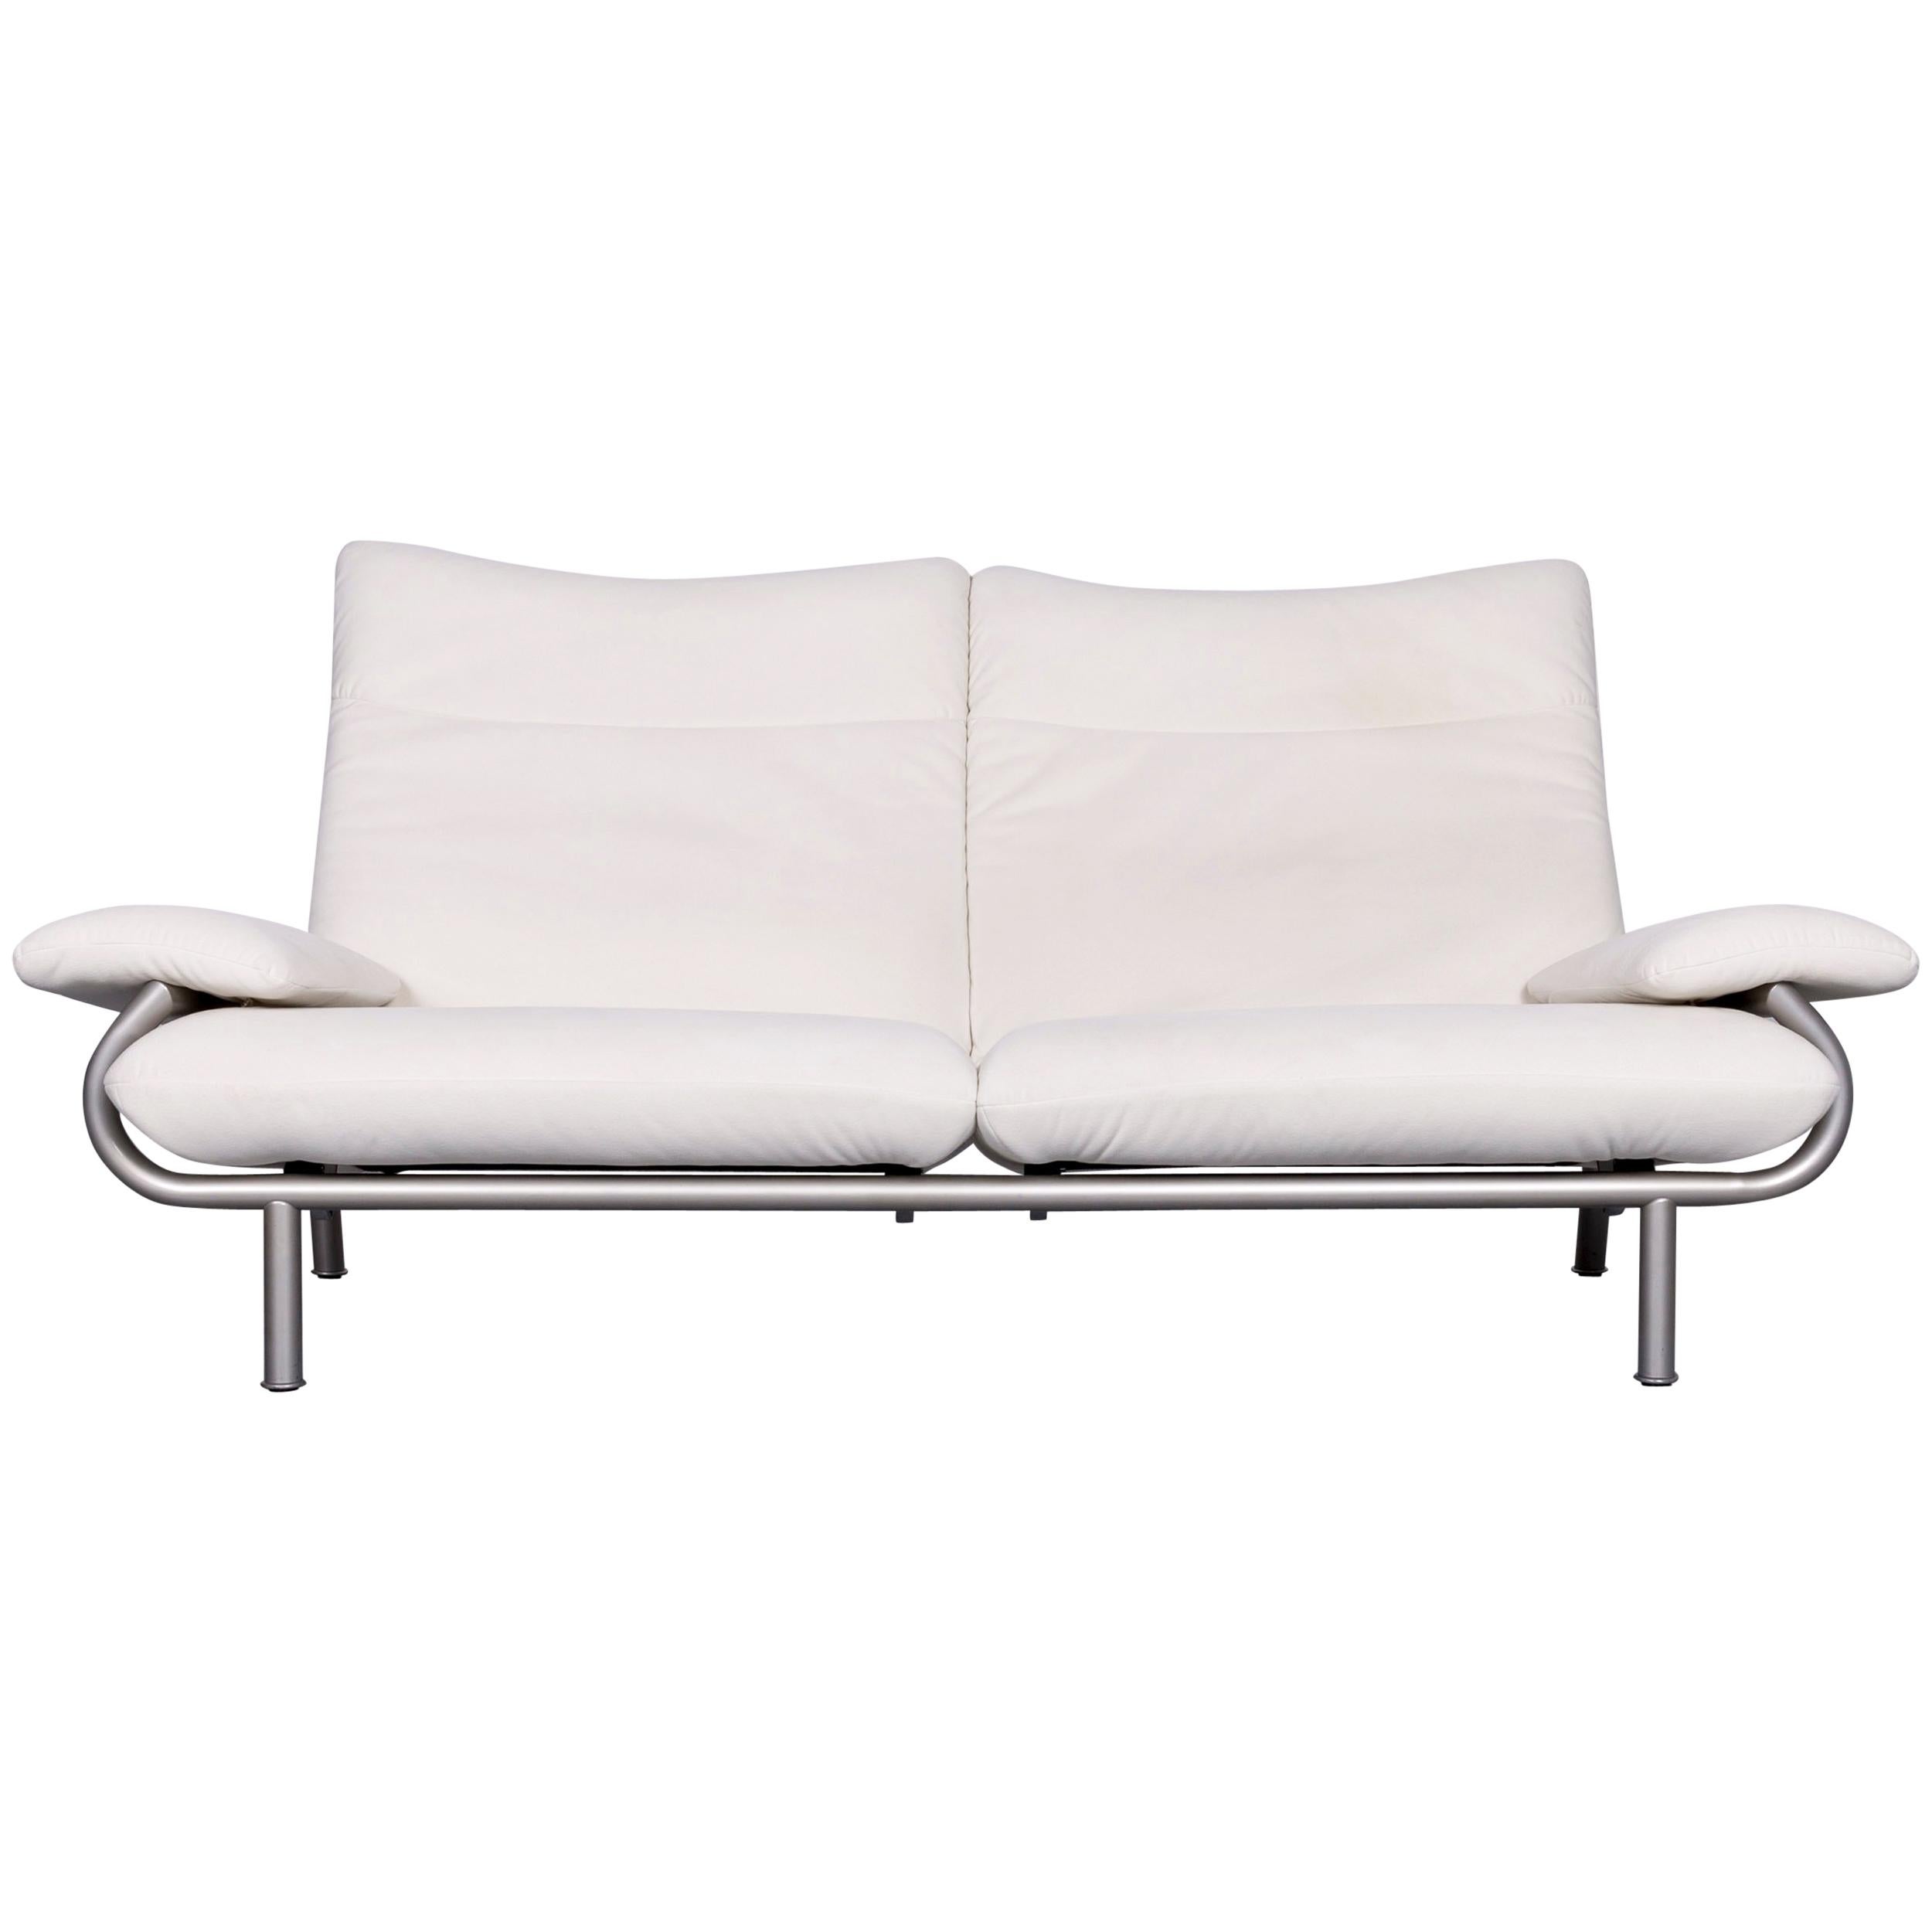 Laauser Designer Fabric Sofa White Three-Seat Couch For Sale